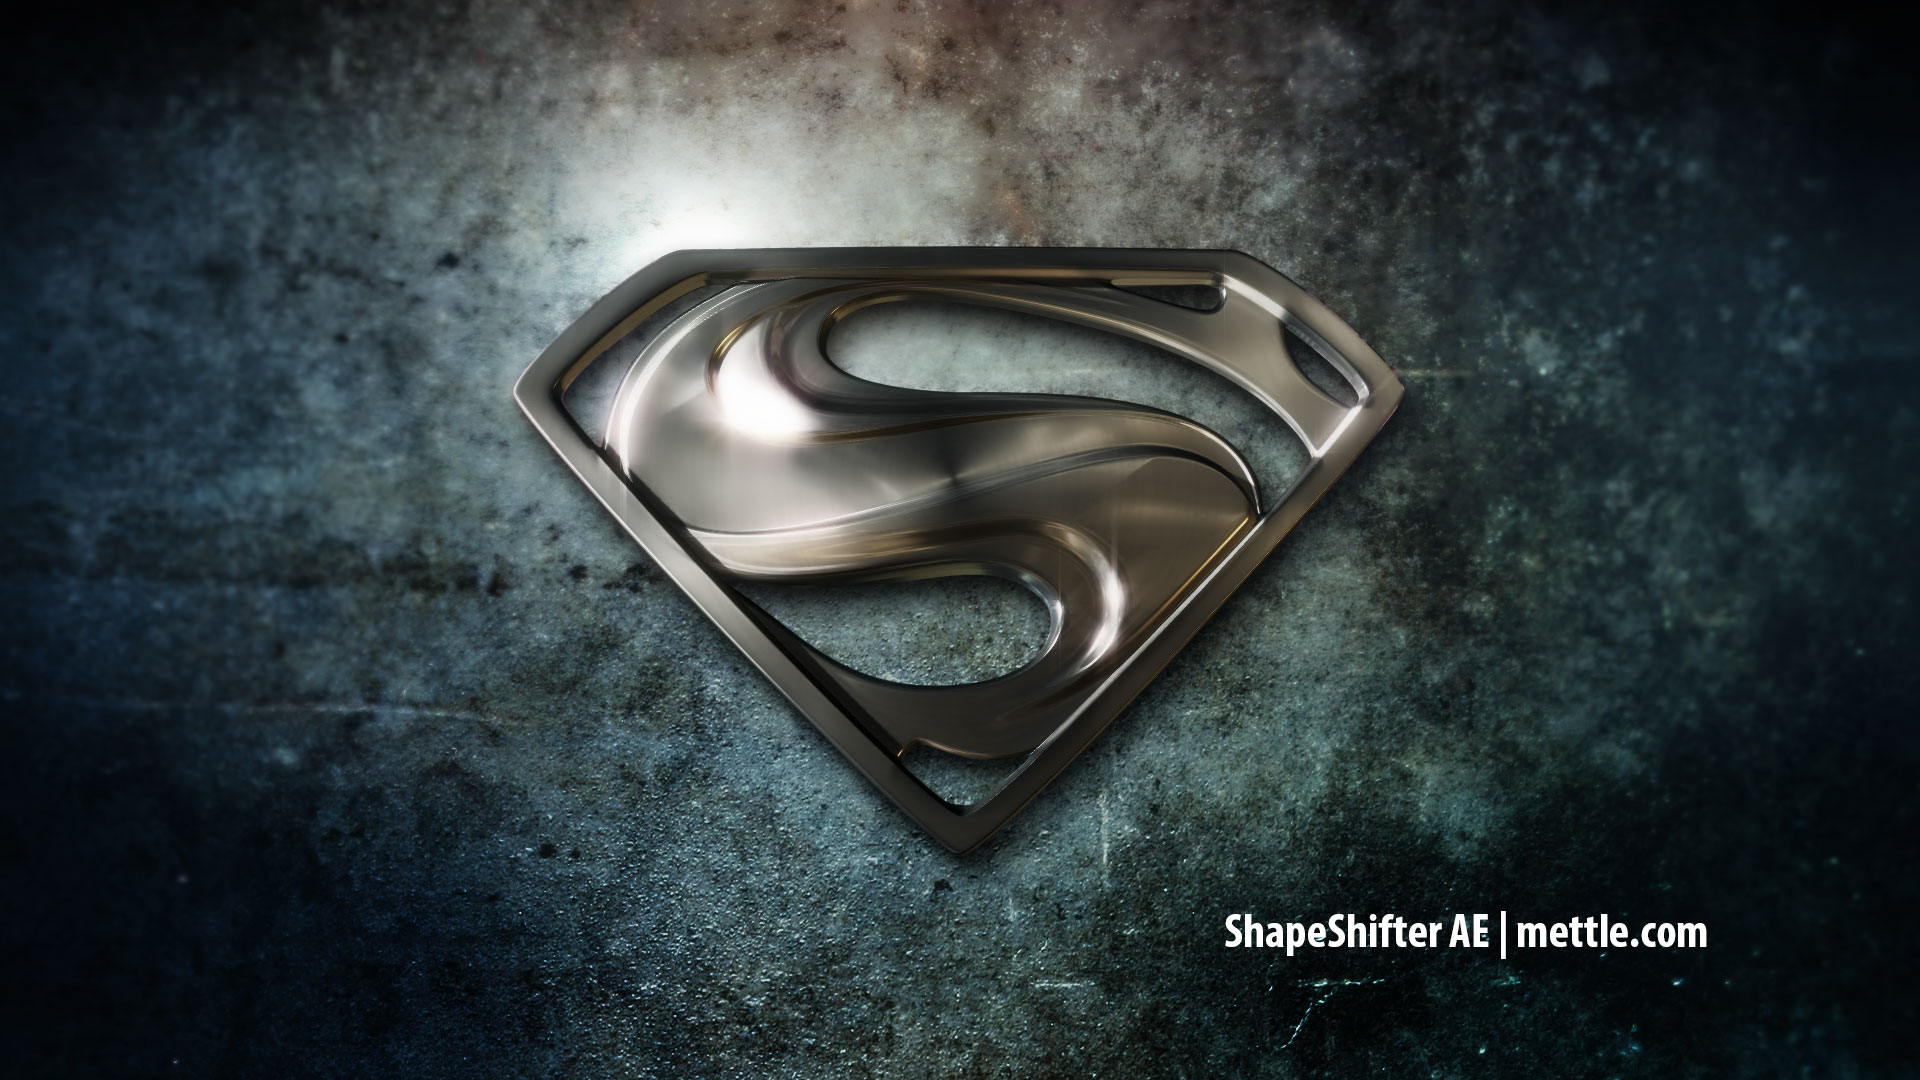 Superman Gallery: Free Files Using ShapeShifter AE